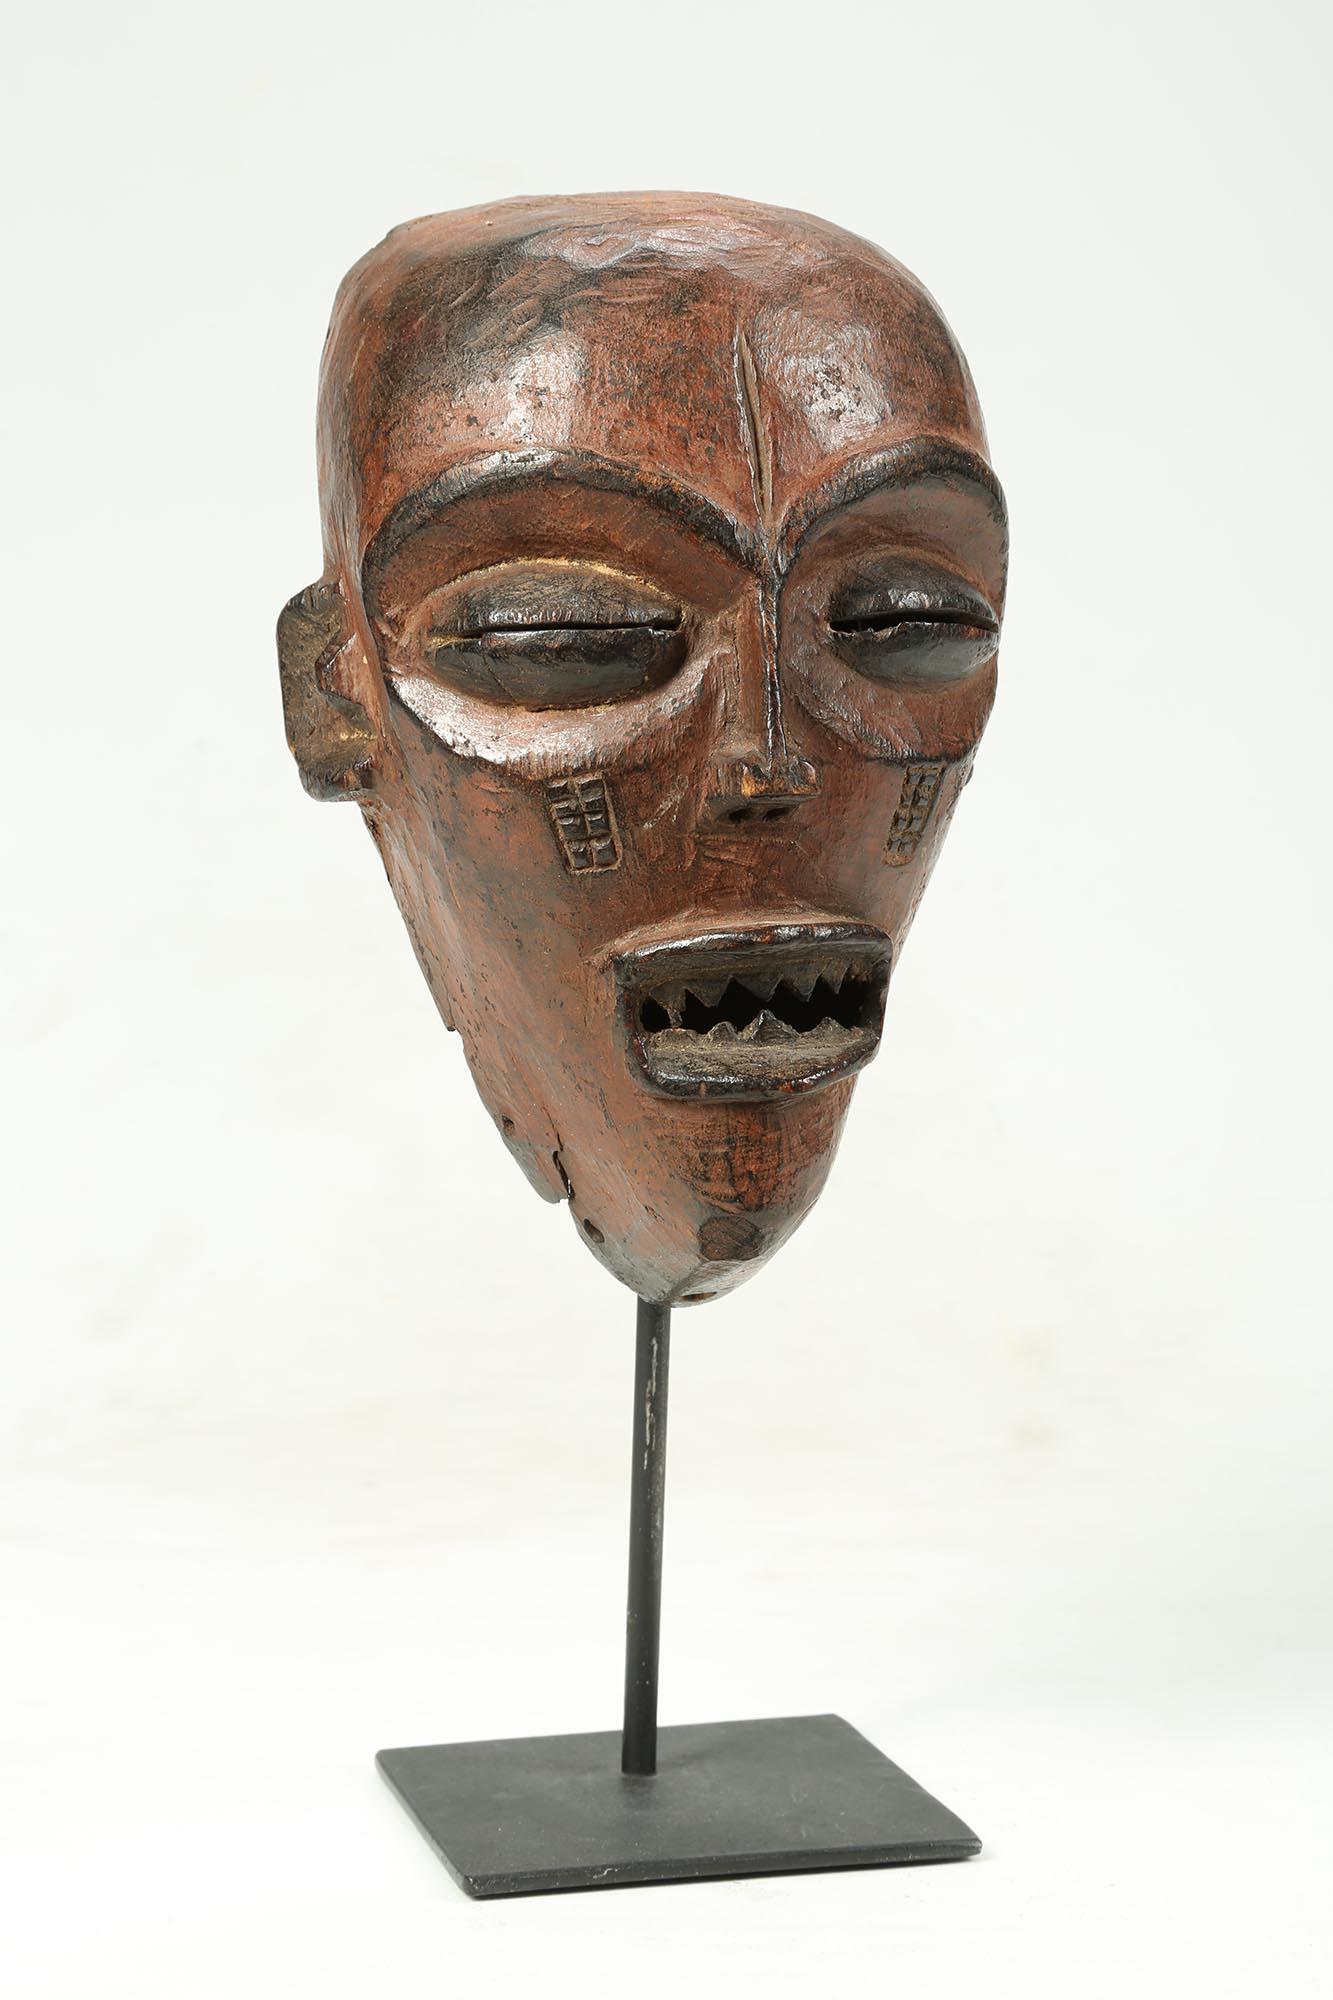 Angolan Early 20th Century Chokwe Wood Mask, Strong Features on Custom Base Congo